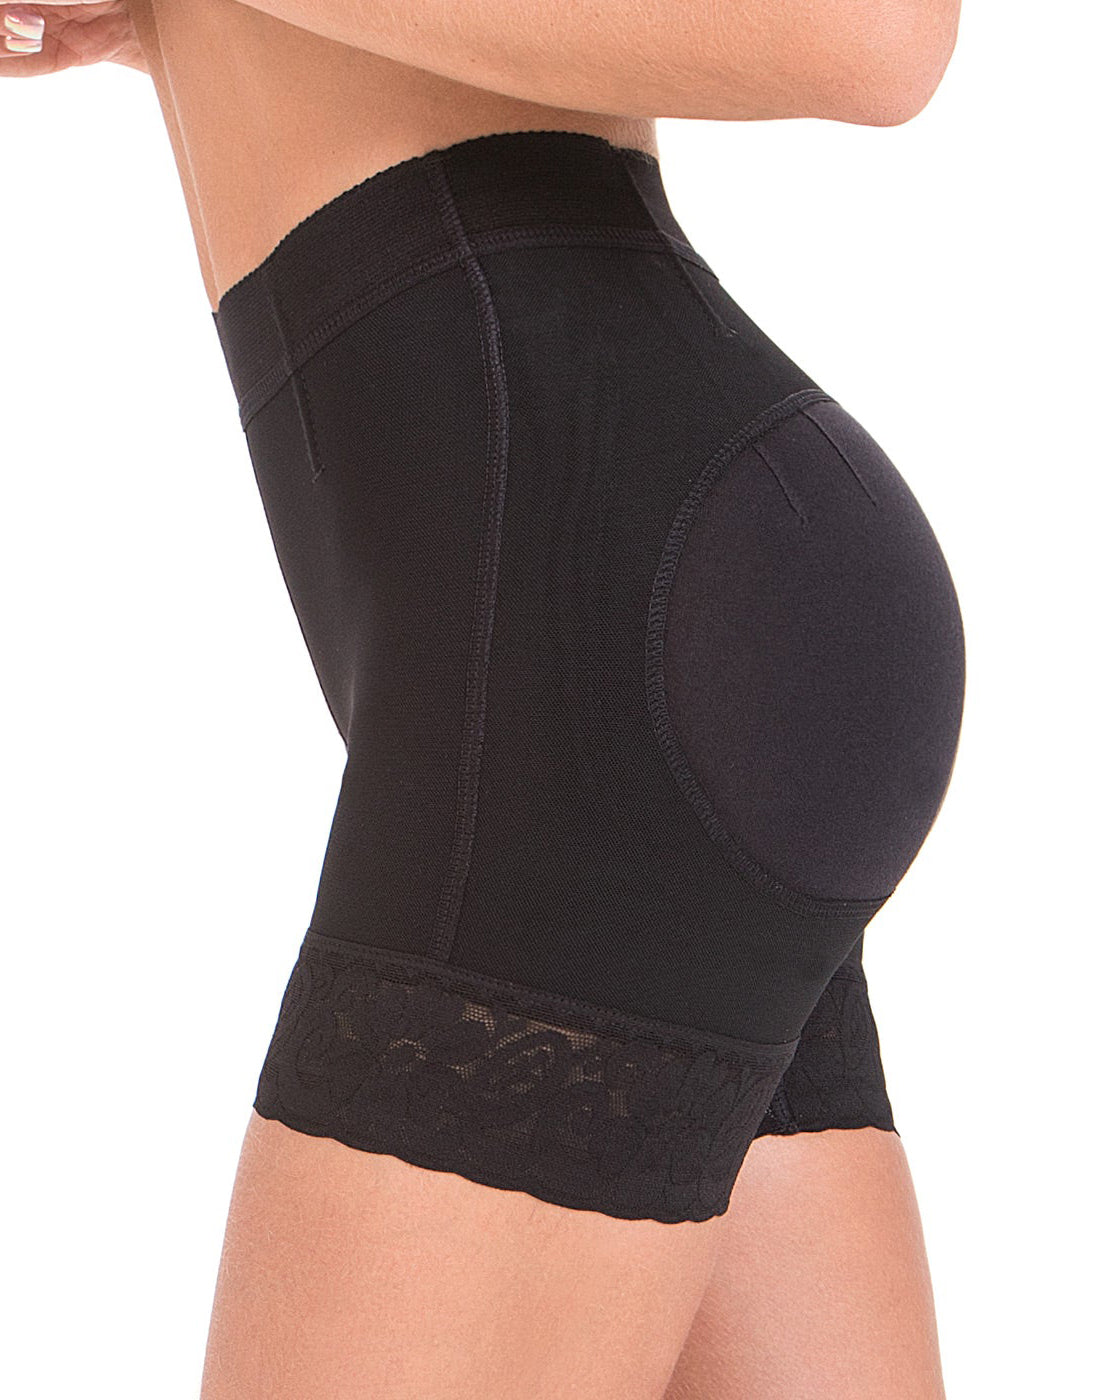 High-Waisted Tummy Control Shorts for Women